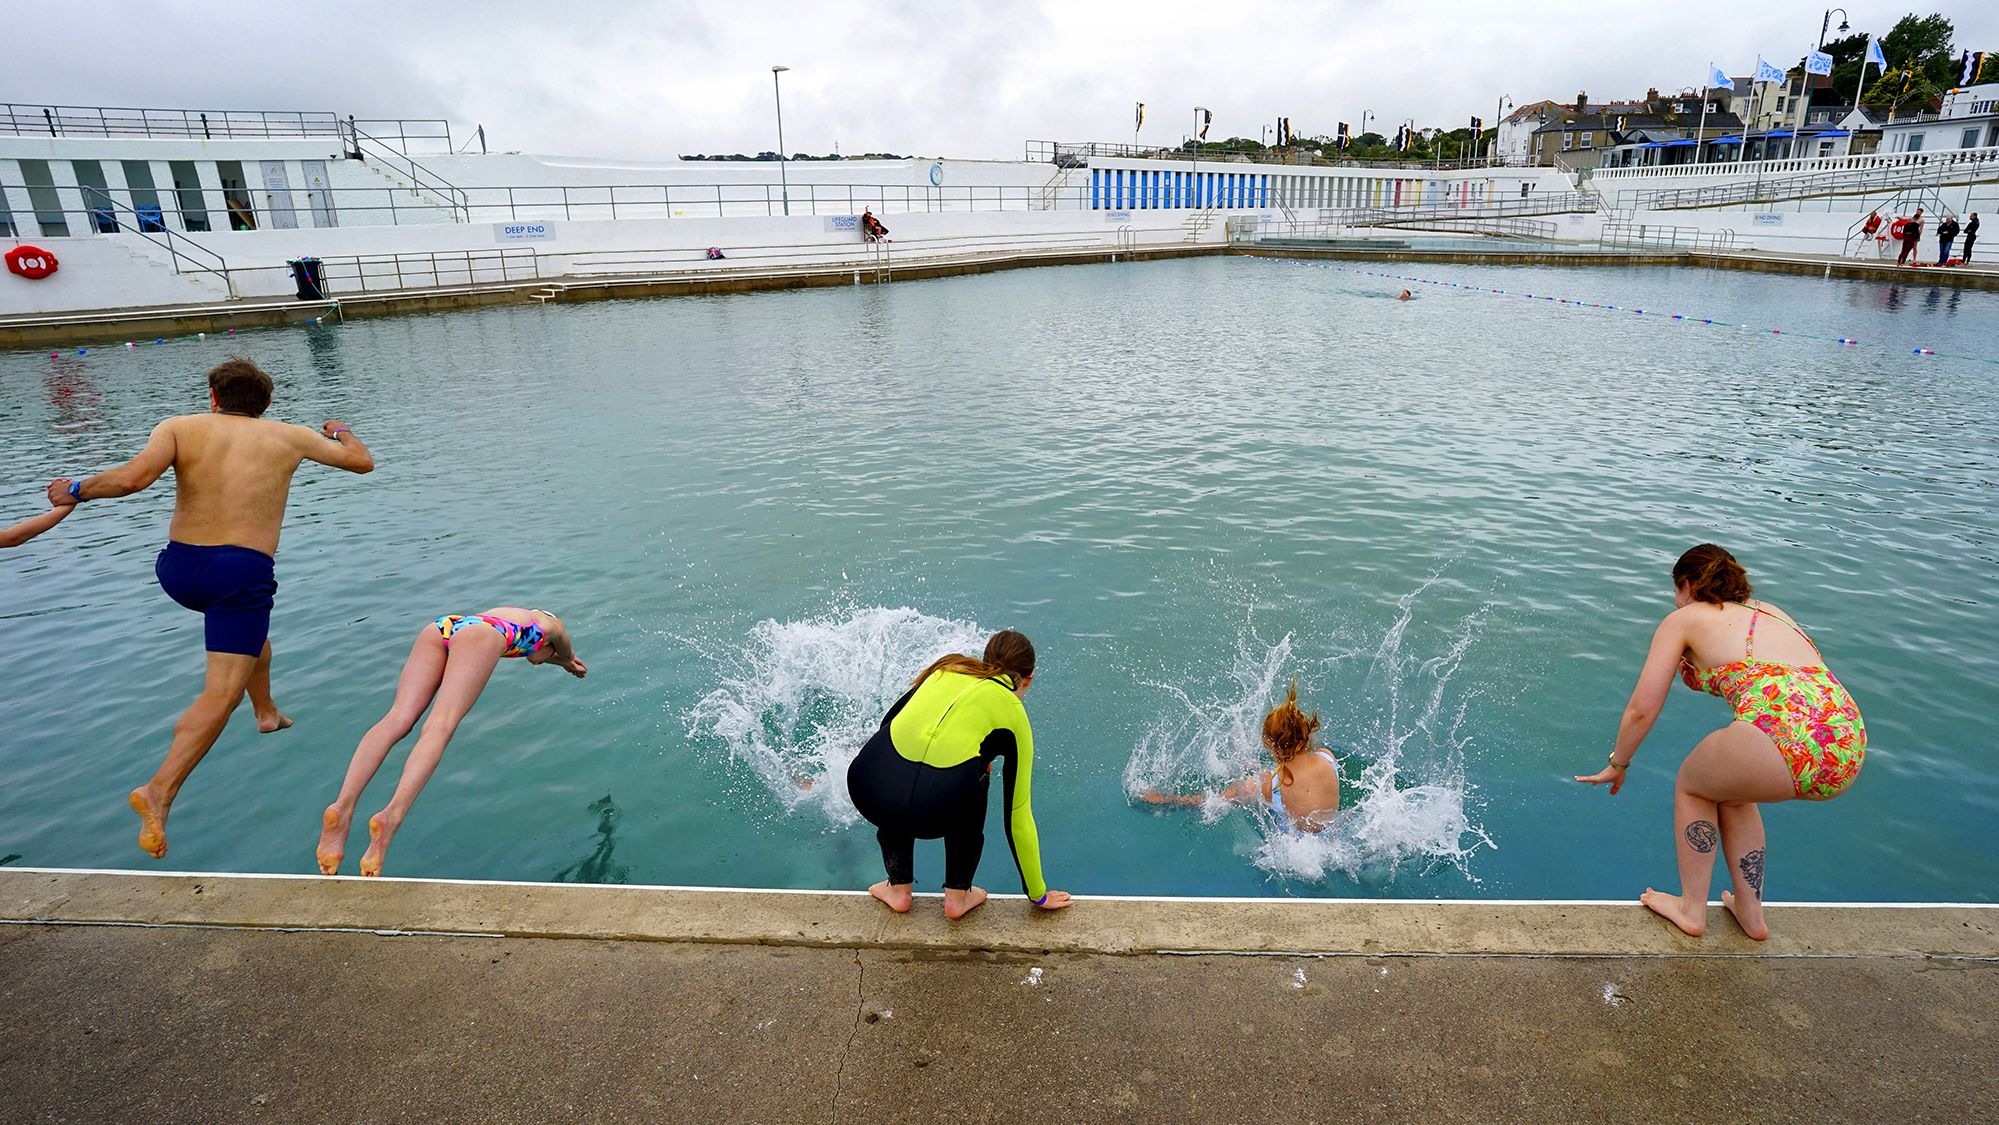 People swim at Jubilee Pool, an open-air seawater pool, after it reopened in Penzance, England, on July 25.